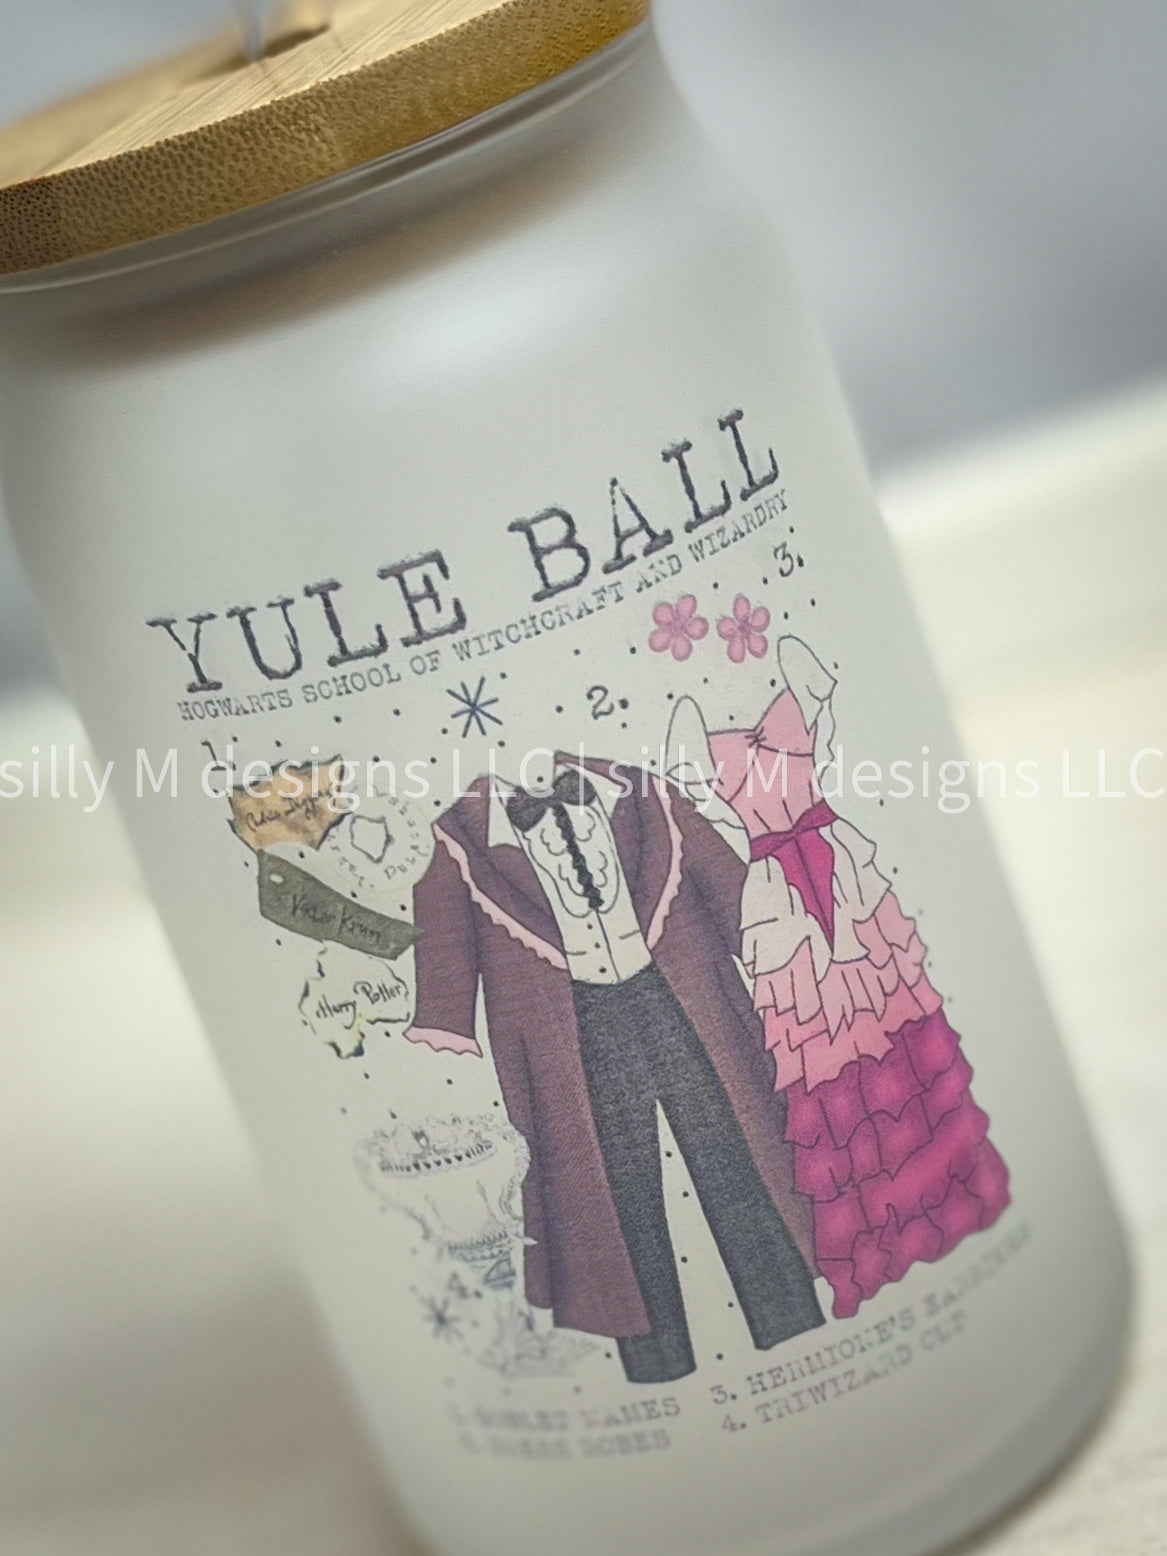 Yule Ball Chart Frosted Glass | 16 ounces, Bamboo Lid, Straw